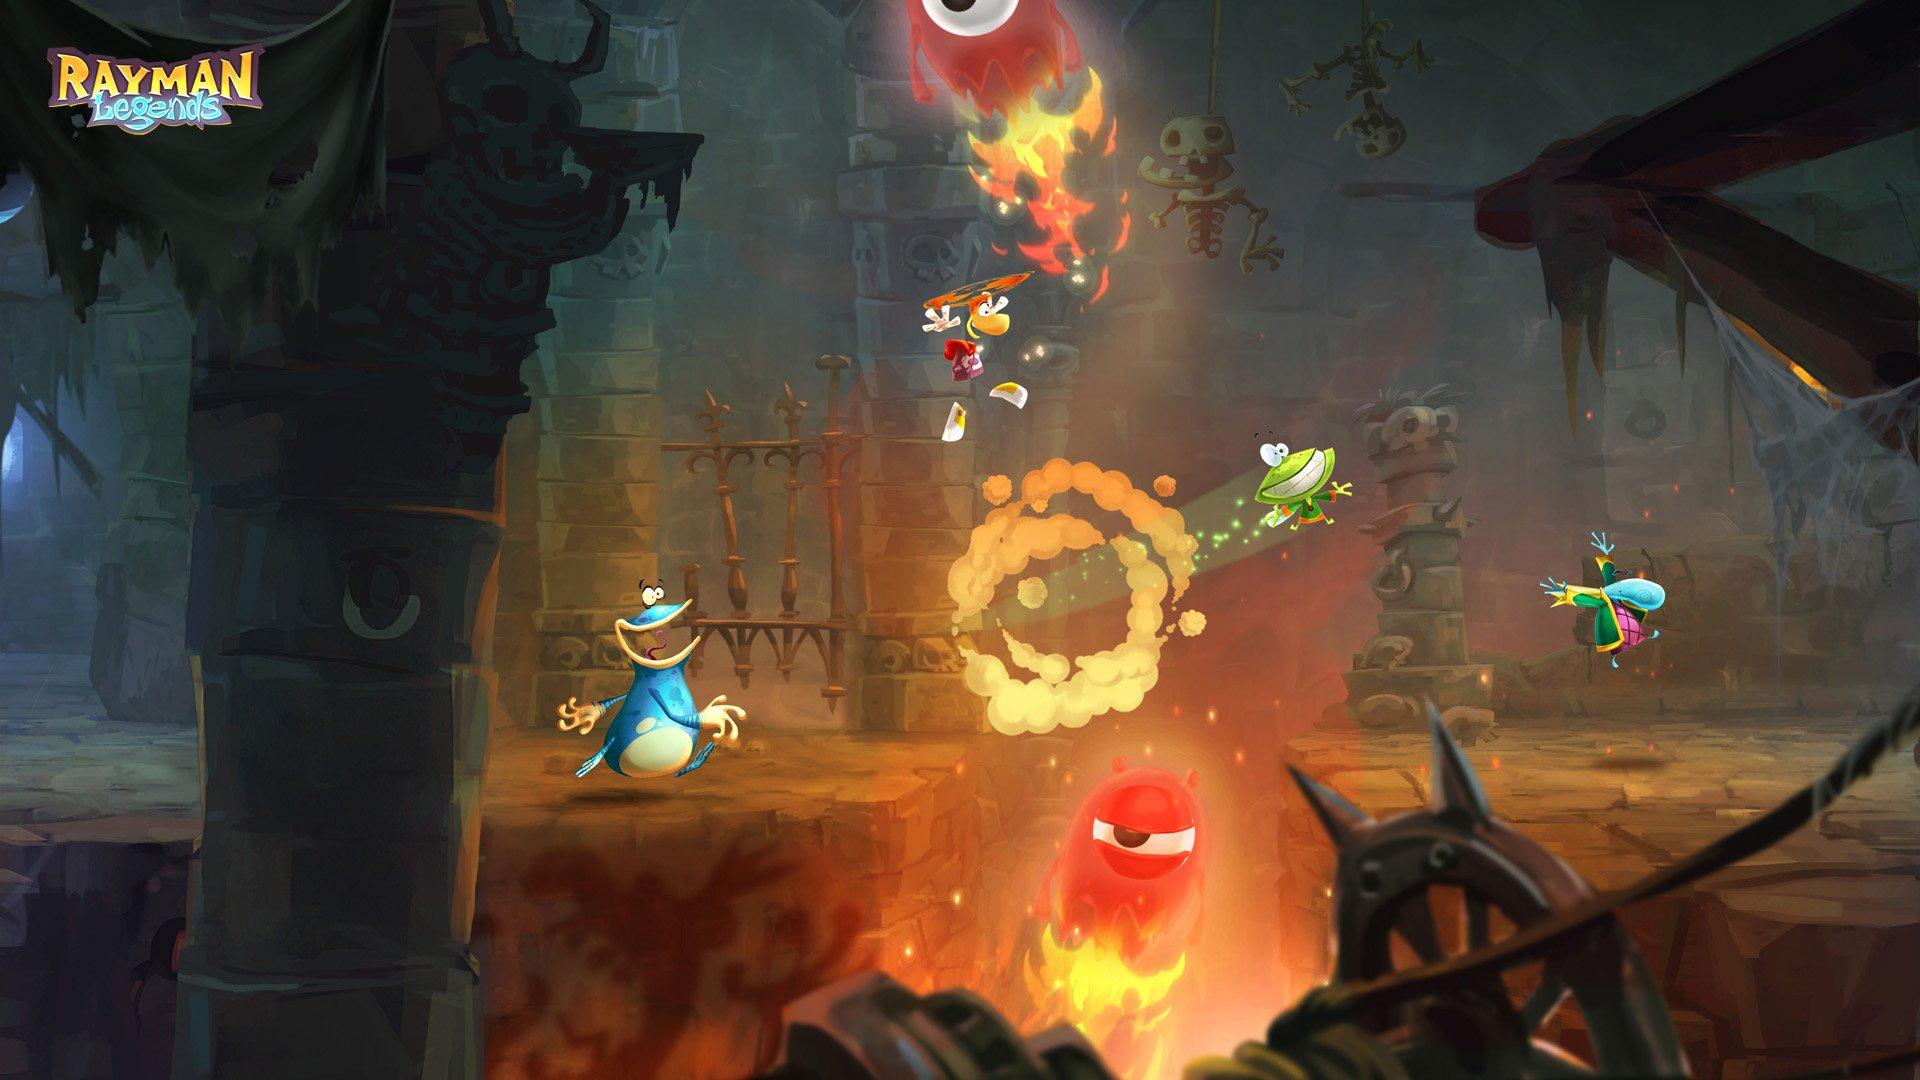  Rayman Legends Definitive Edition (Nintendo Switch) : Video  Games